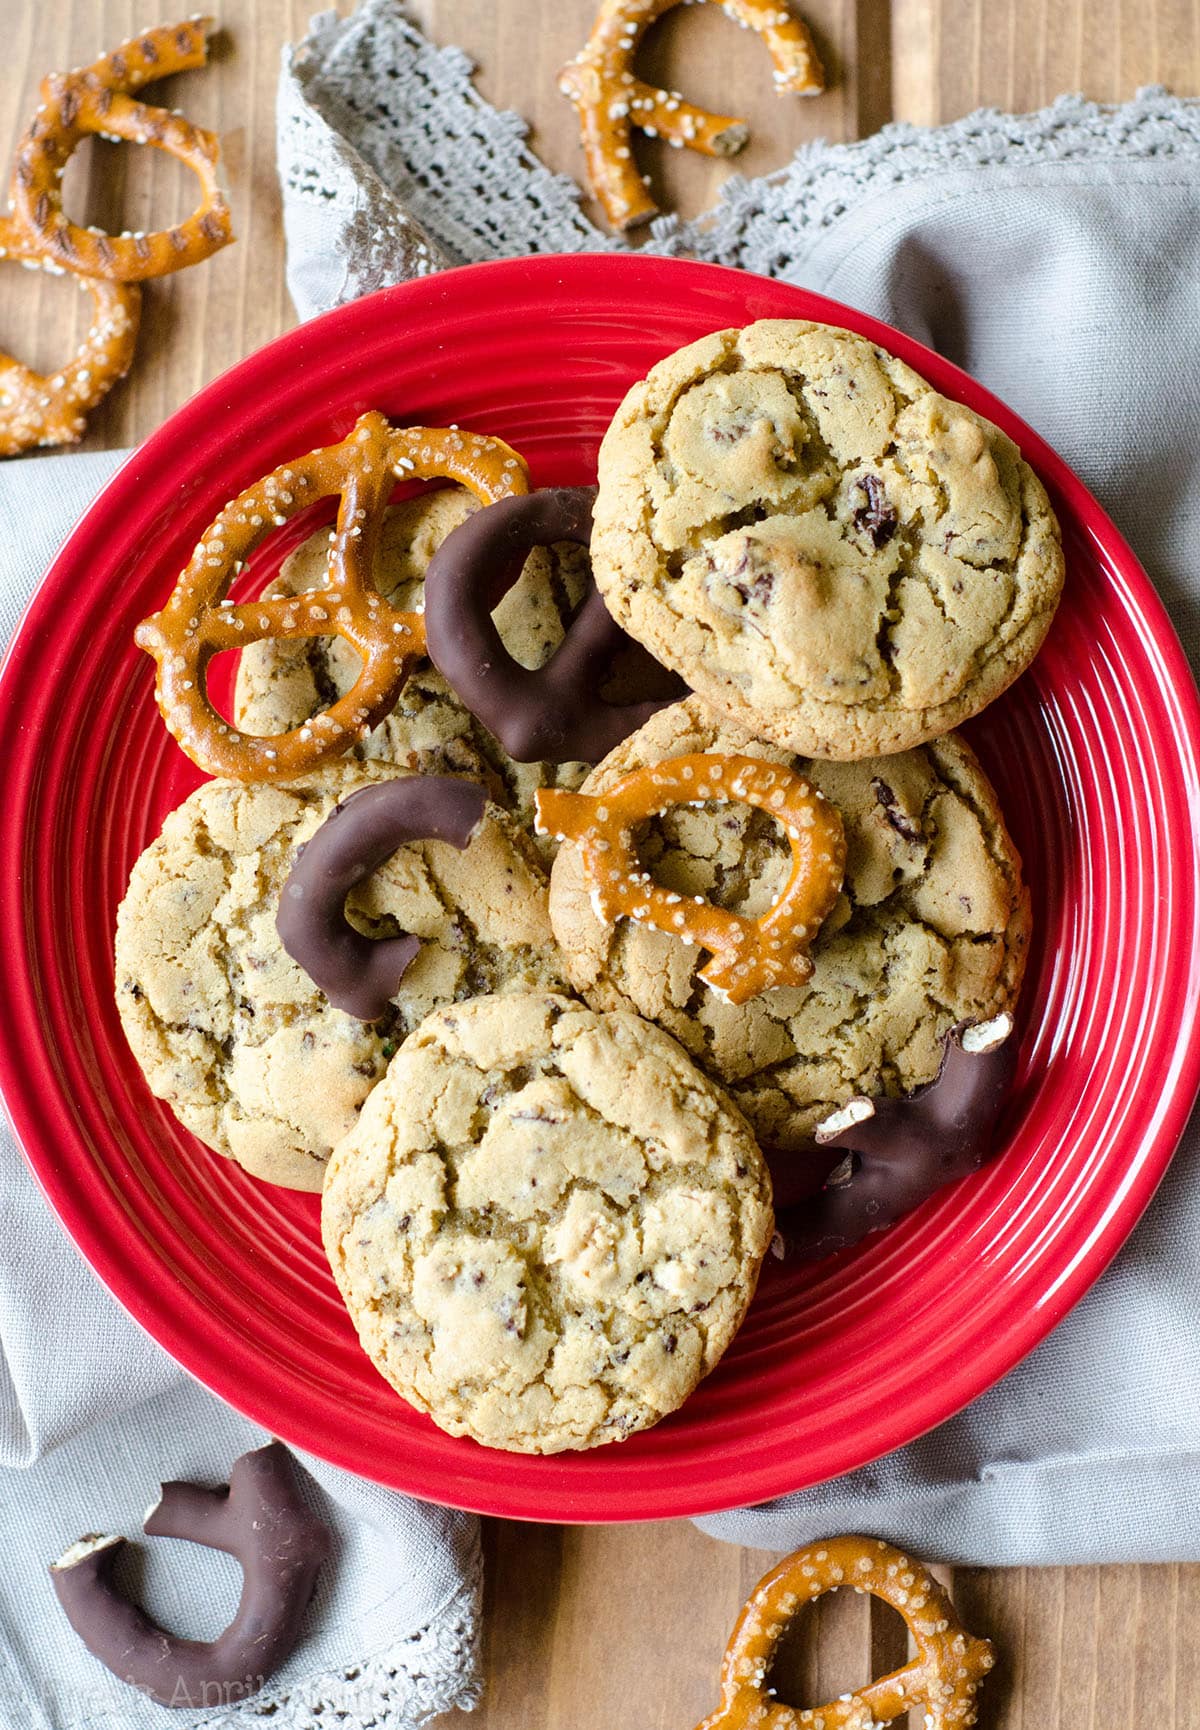 Chocolate Covered Pretzel Cookies: Simple brown sugar cookies filled with sweet and salty chocolate covered pretzels.